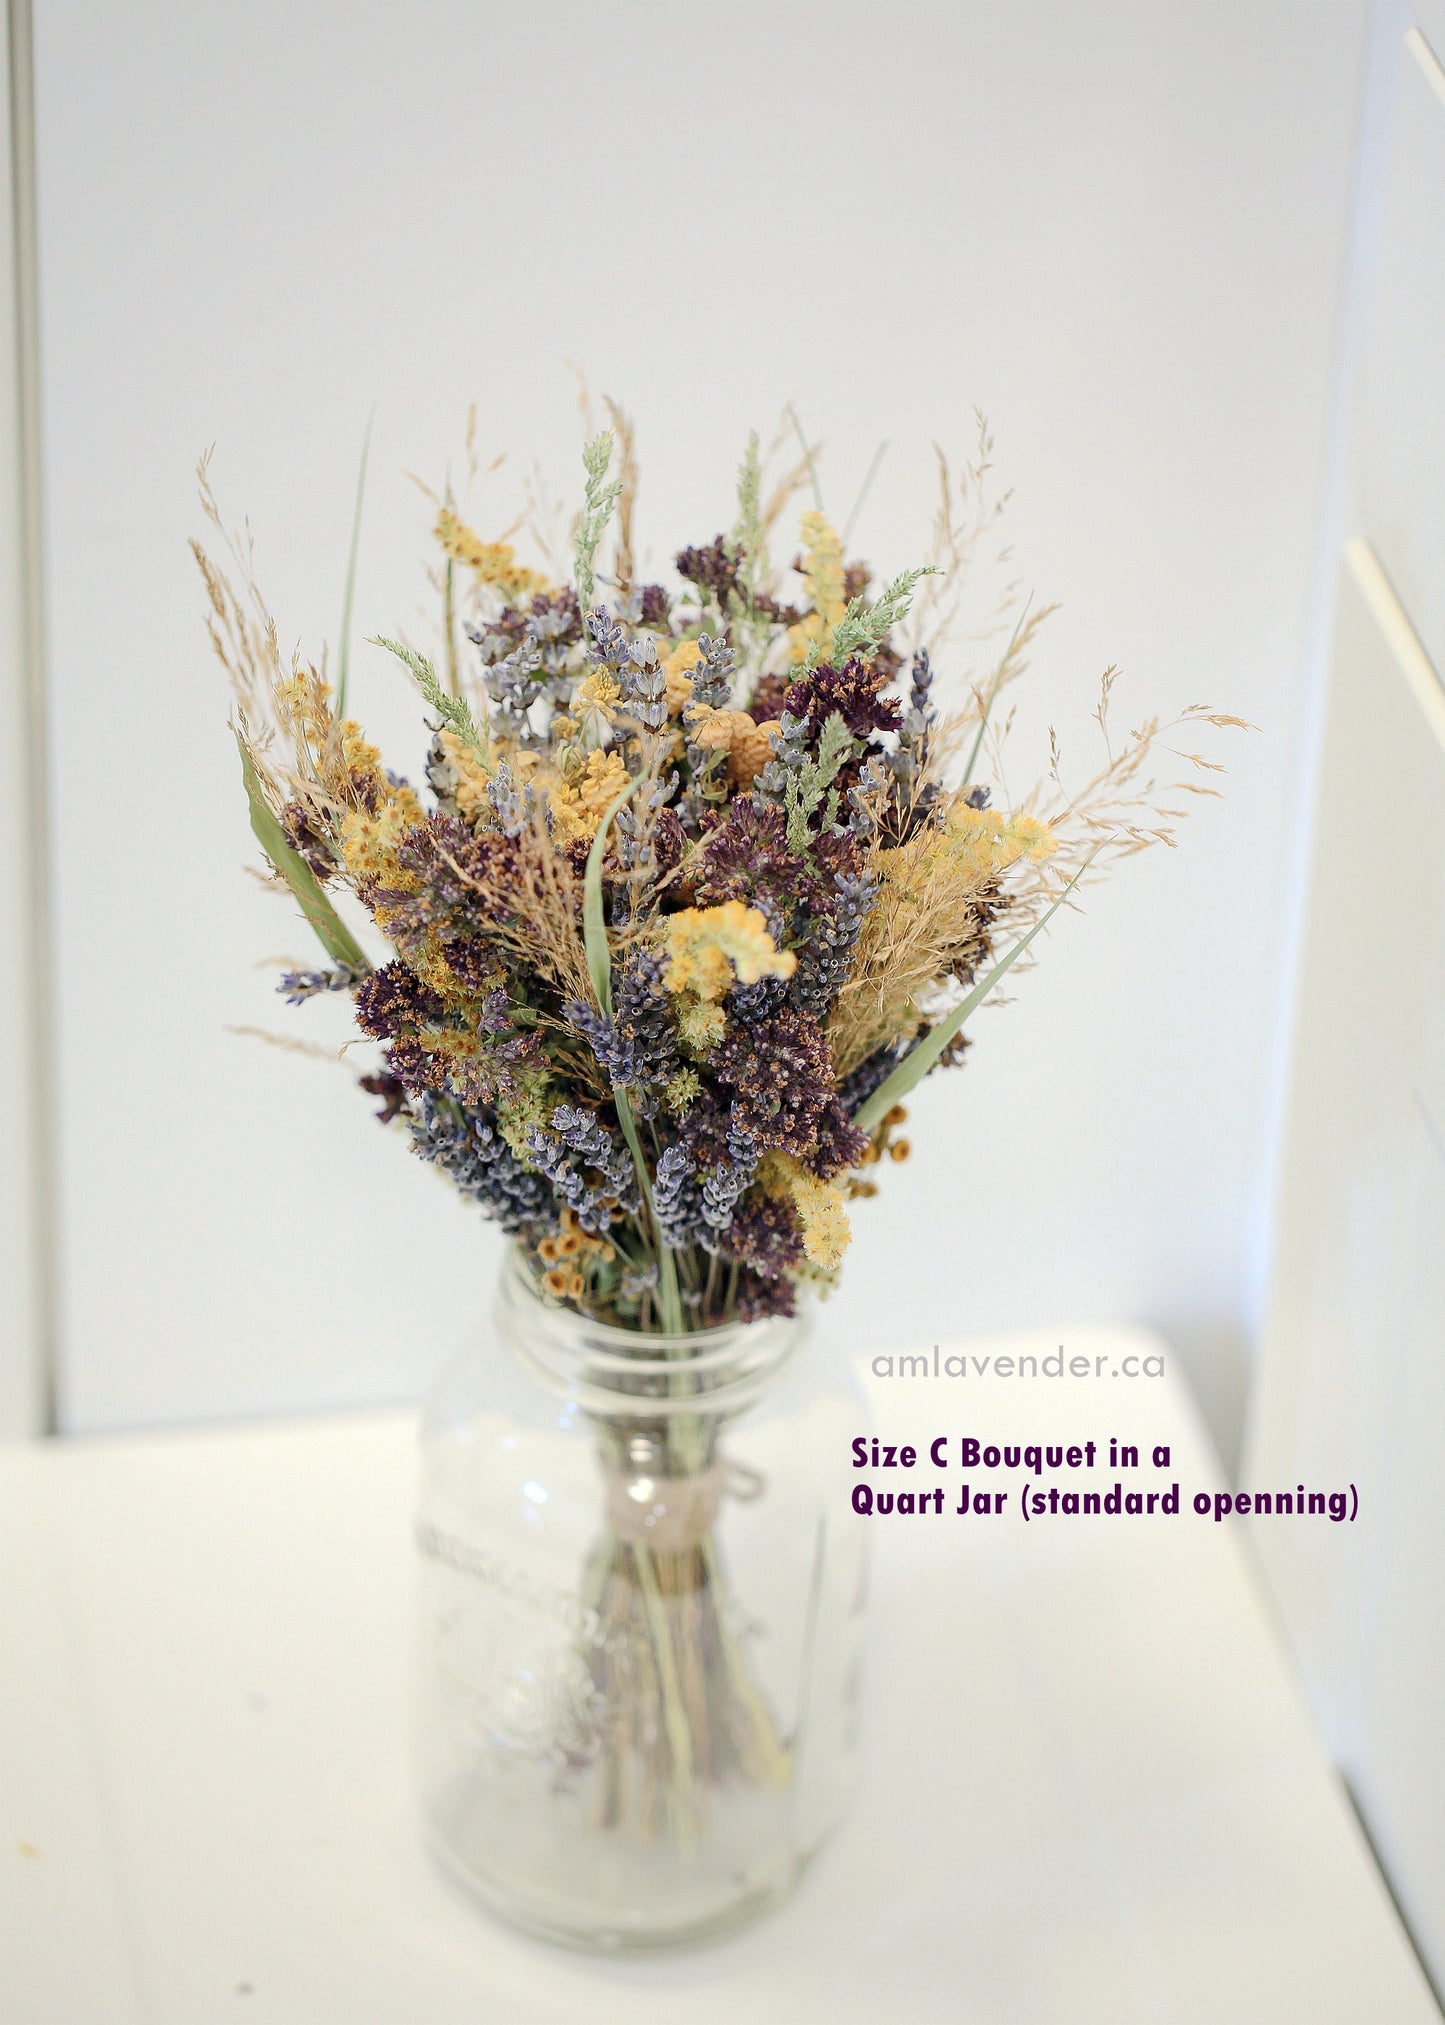 Bouquet : Valley Rose - Home Sweet Home | AM Lavender